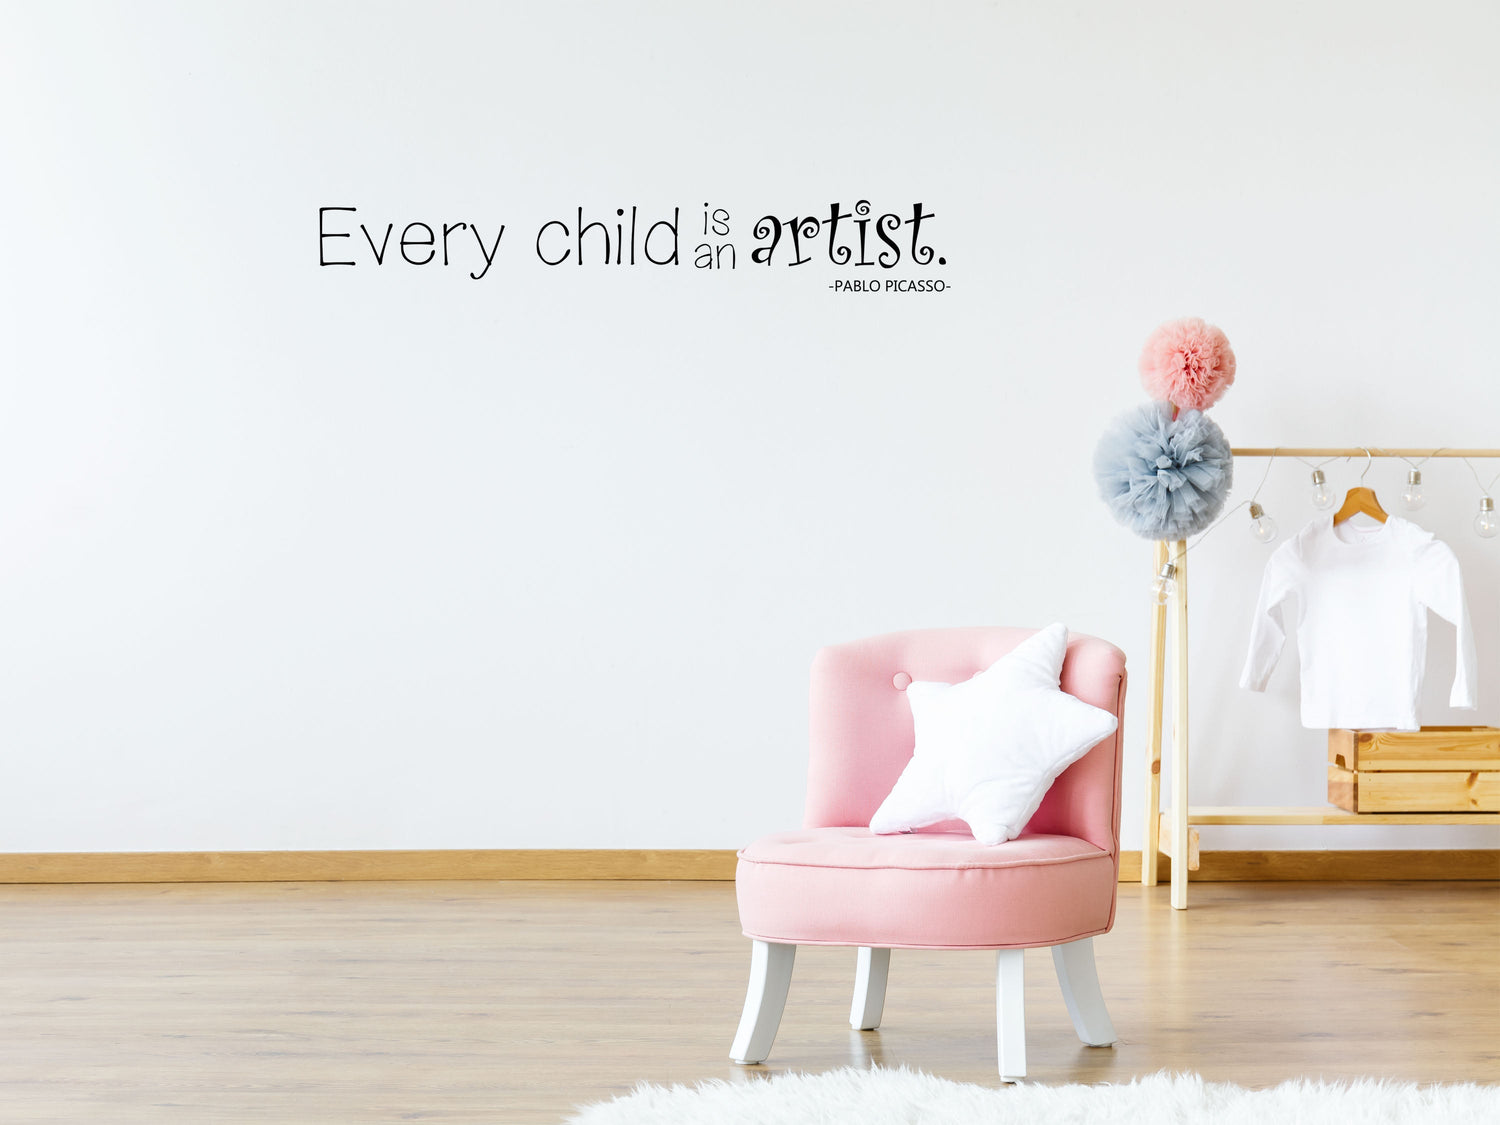 Adorable Kids' Wall Decals: Transform Children's Rooms with Playful Designs!